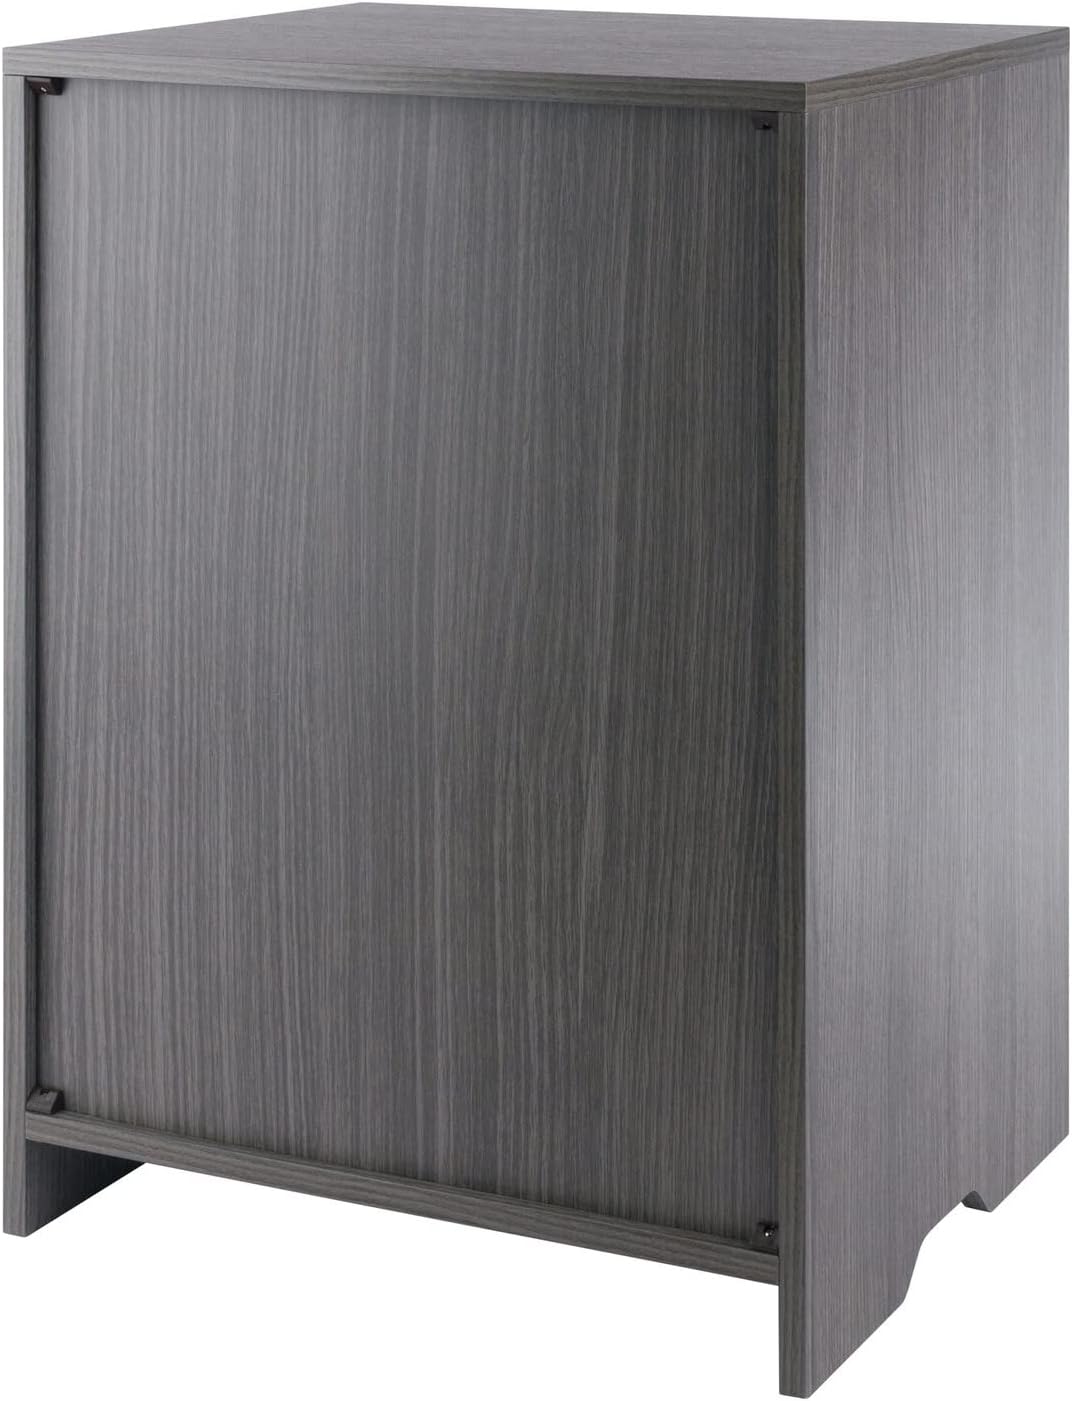 Winsome Wood Nova Storage Cabinet, 1-Drawer with Open Shelf, Charcoal